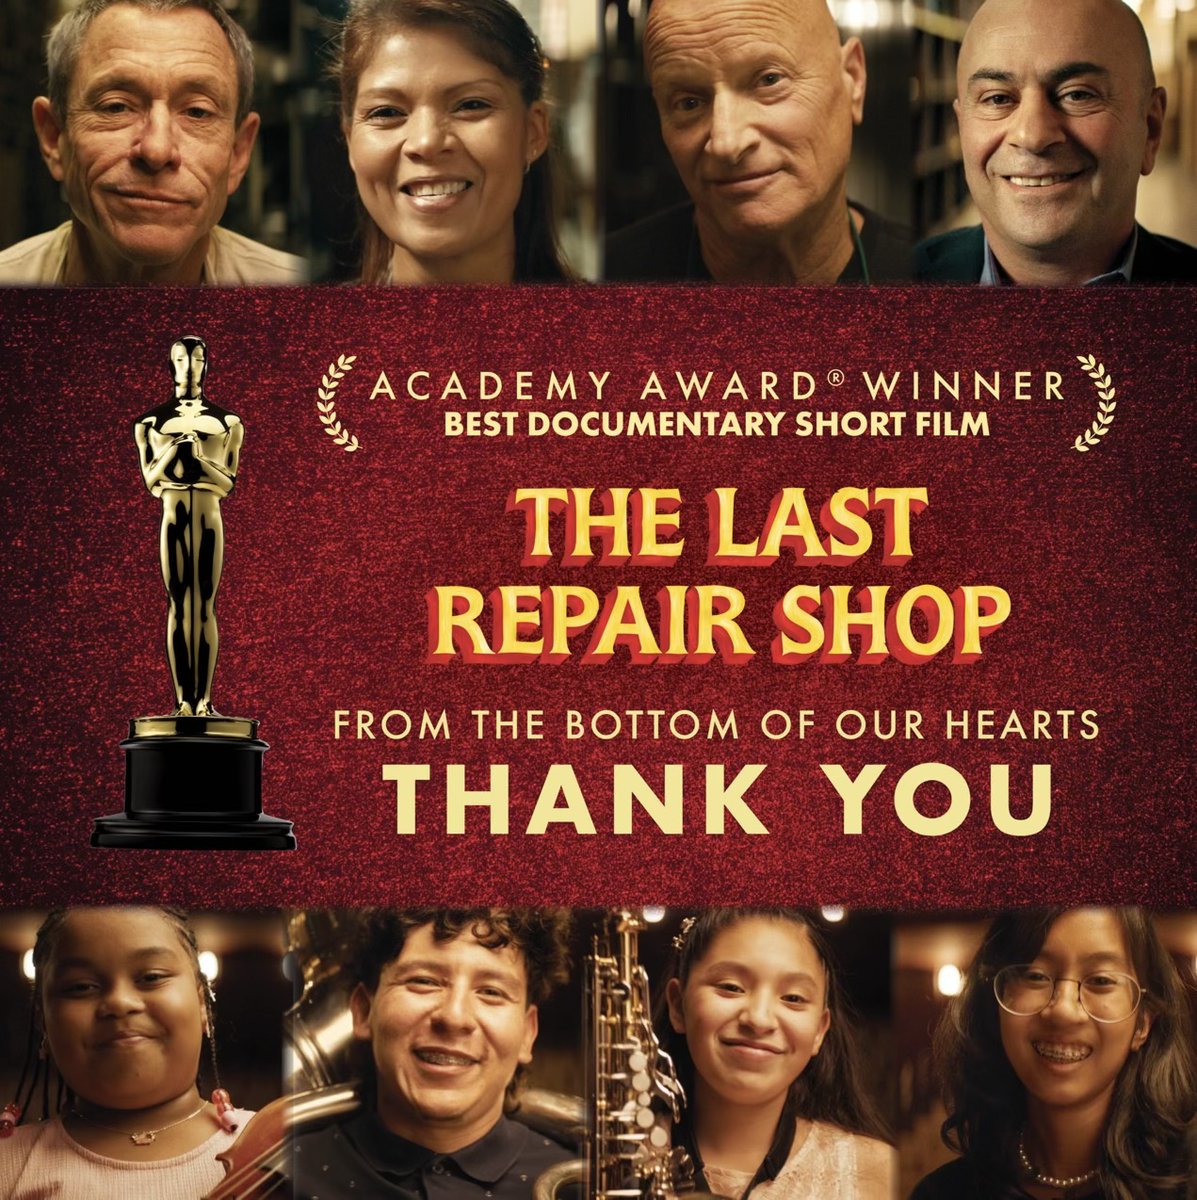 The Last Repair Shop is an Academy Award winner! We are endlessly grateful for the level of support and this film has received. This journey has been nothing short of a dream come true. To everyone who poured their heart into this film, thank you from the very bottom of ours.